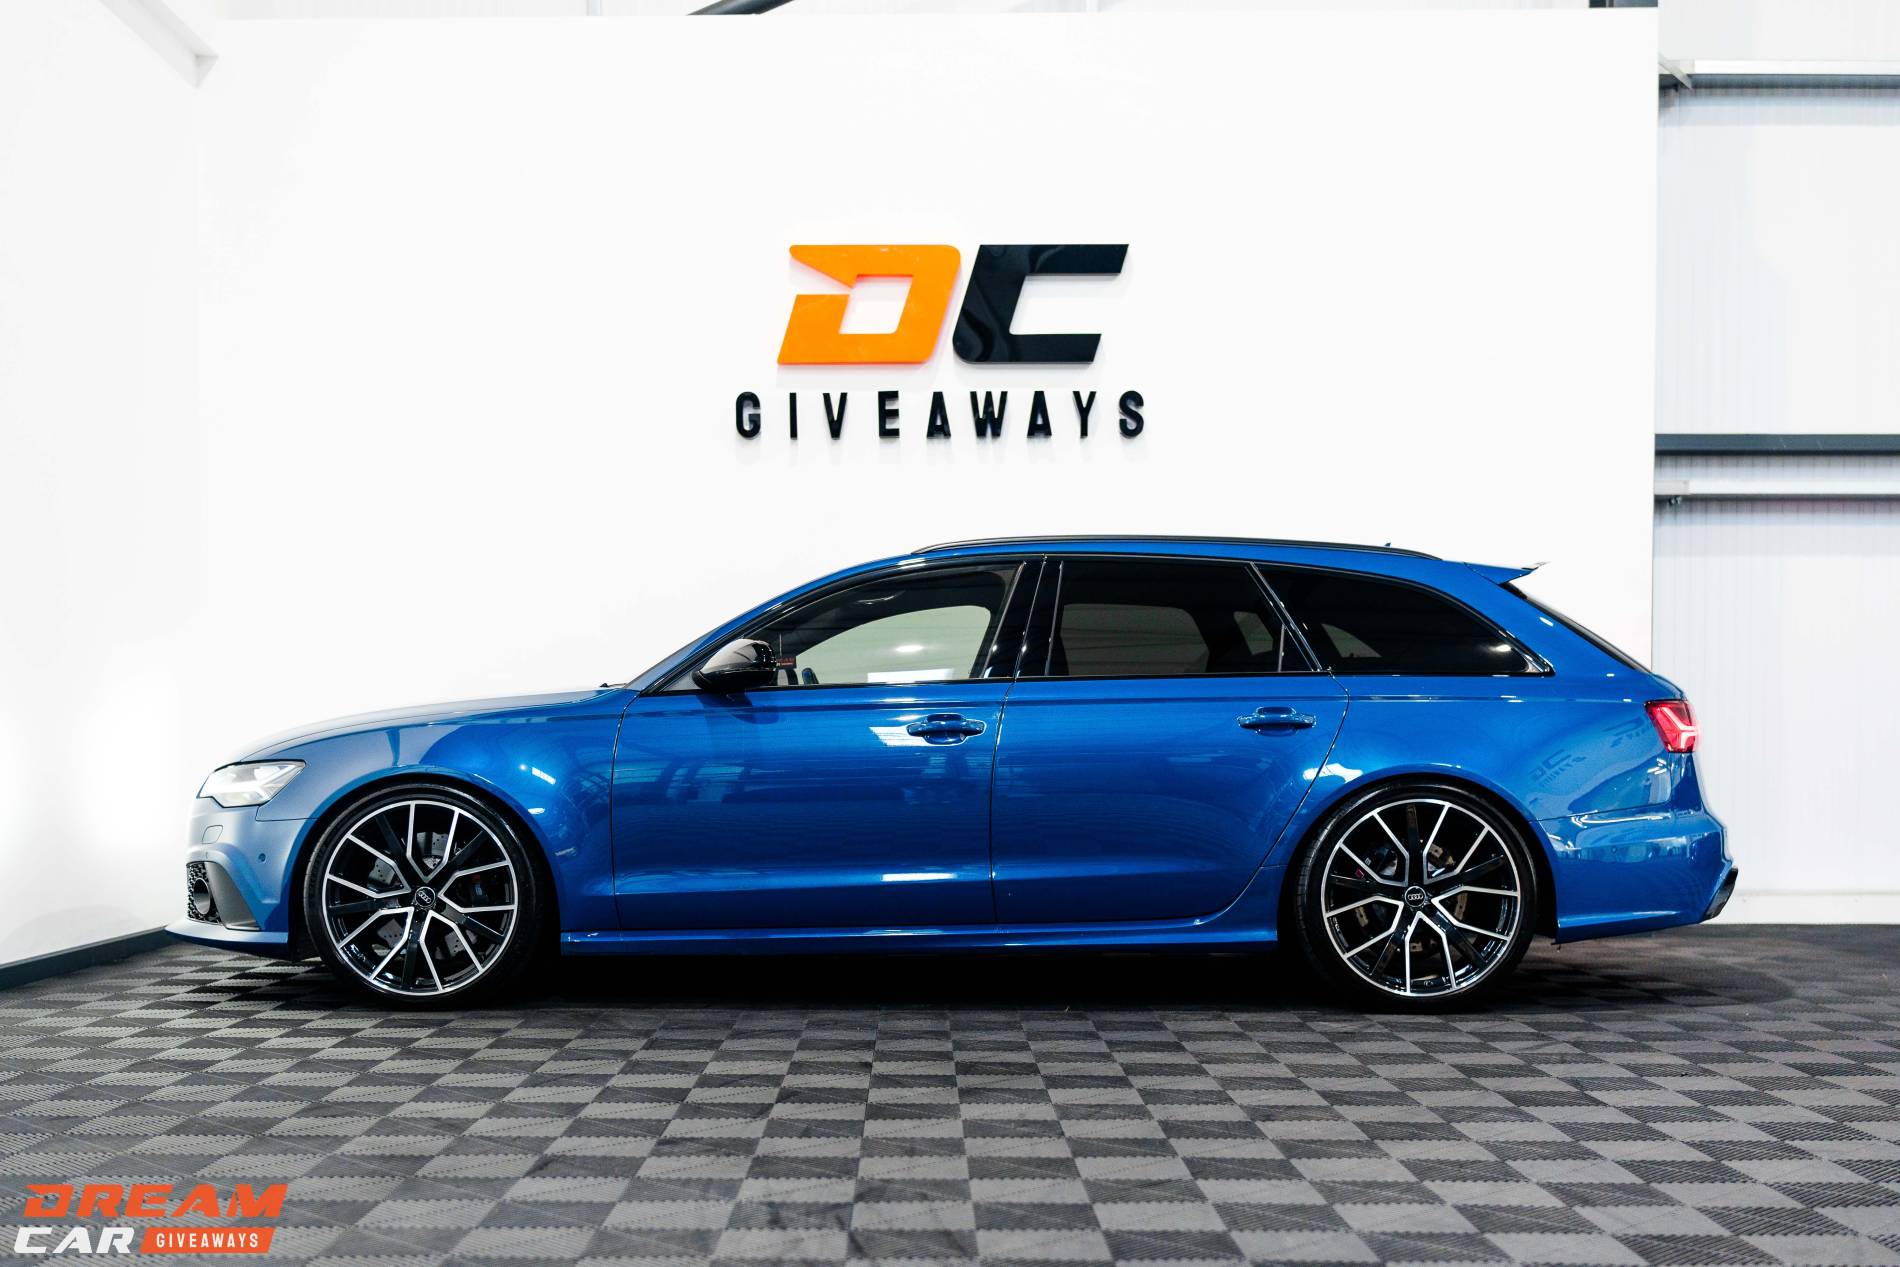 Win this Audi RS6 Performance & £1,000 or £30,000 Tax Free